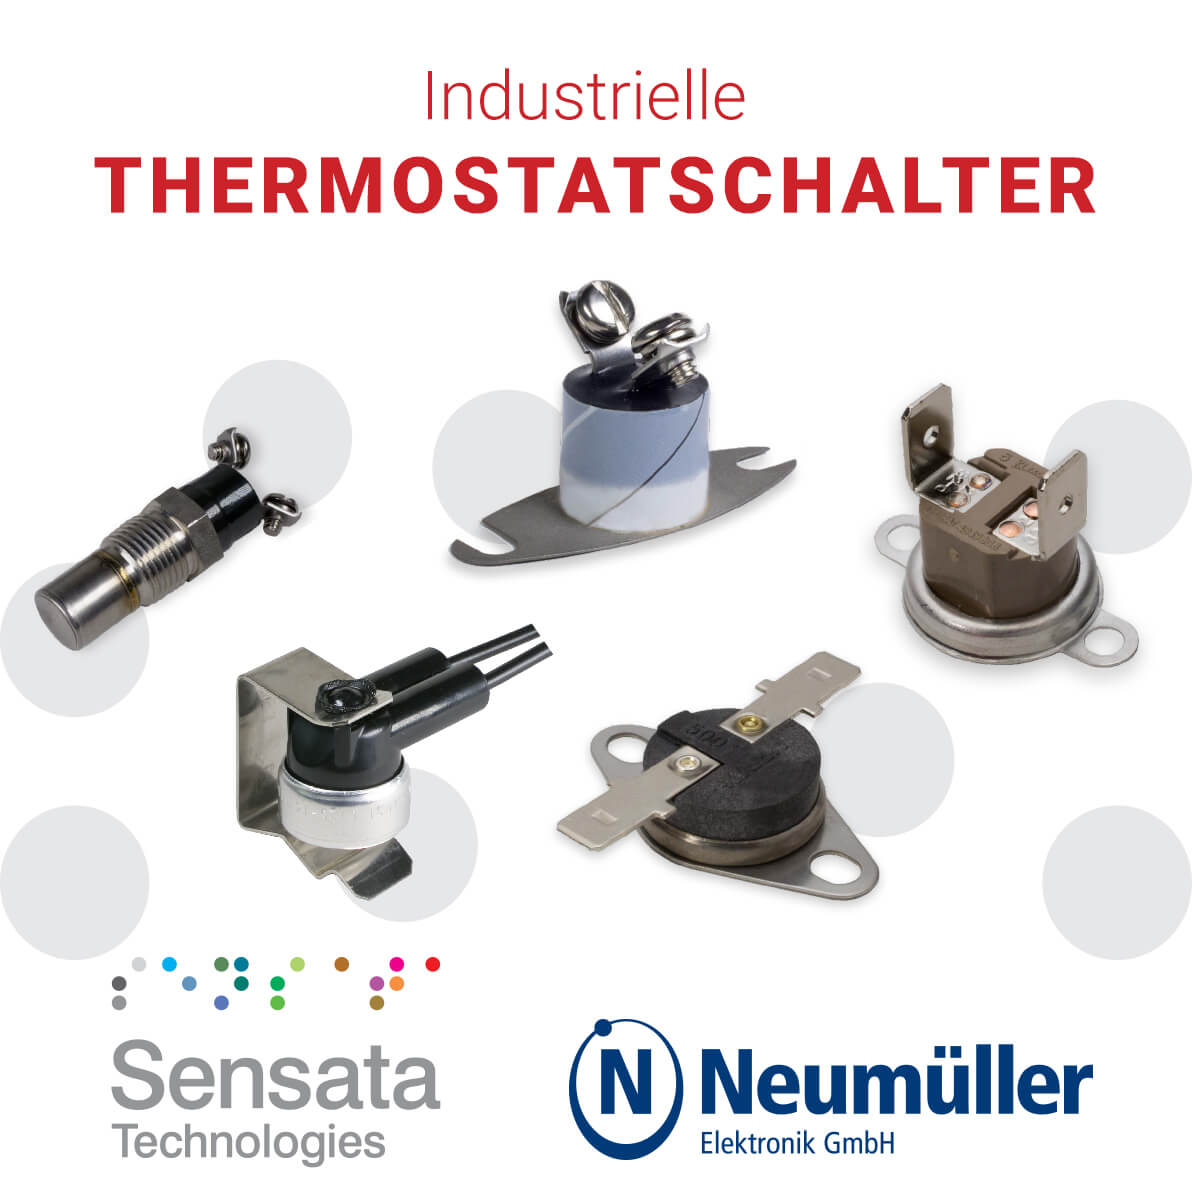 Industrial thermostatic switches